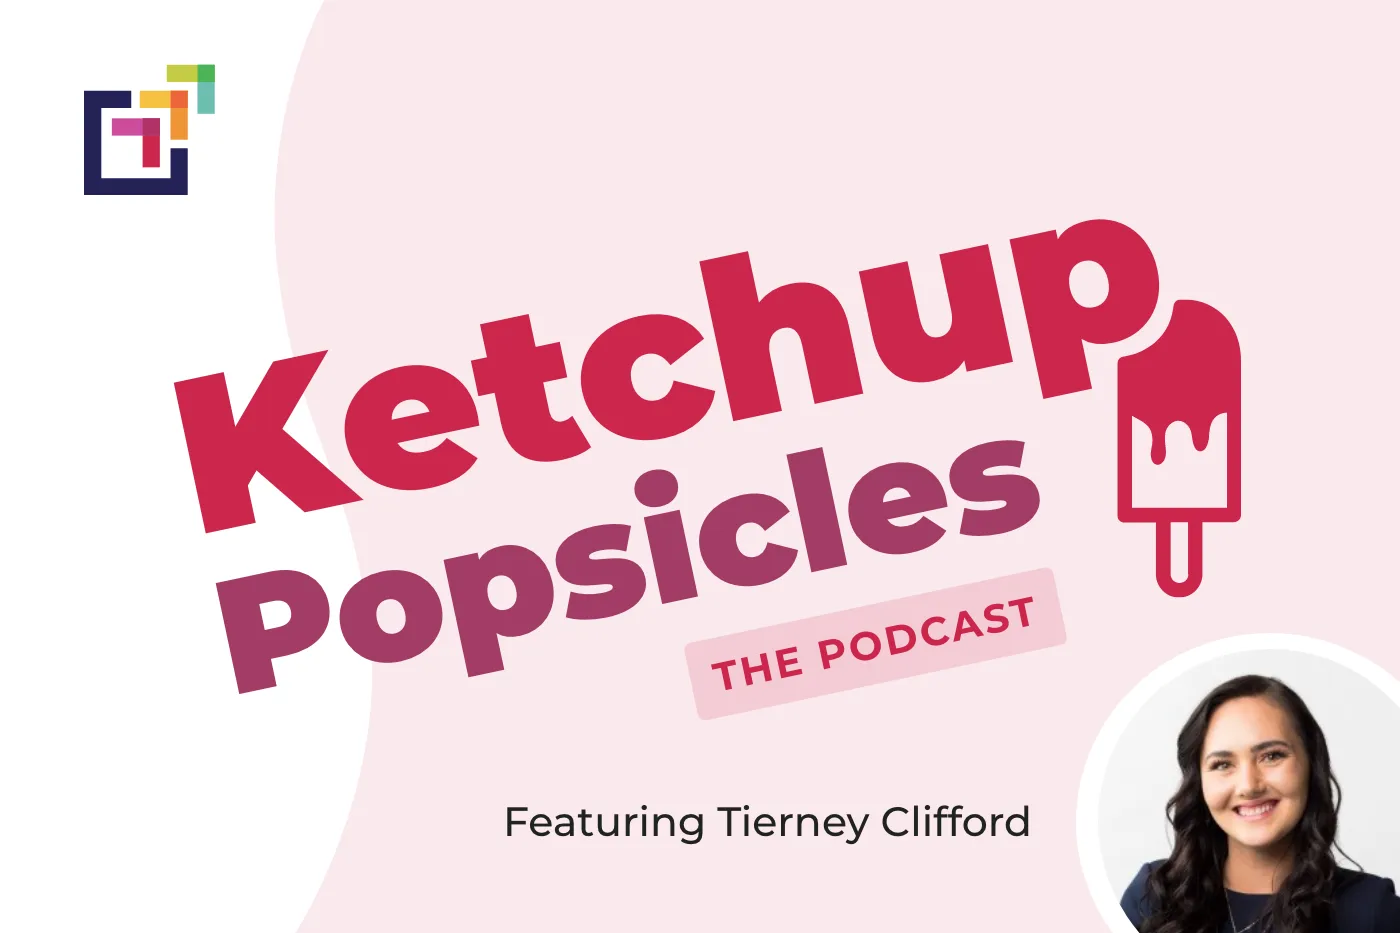 Peer Sales Agency - Ketchup Popsicles Podcast Episode featuring Tierney Clifford